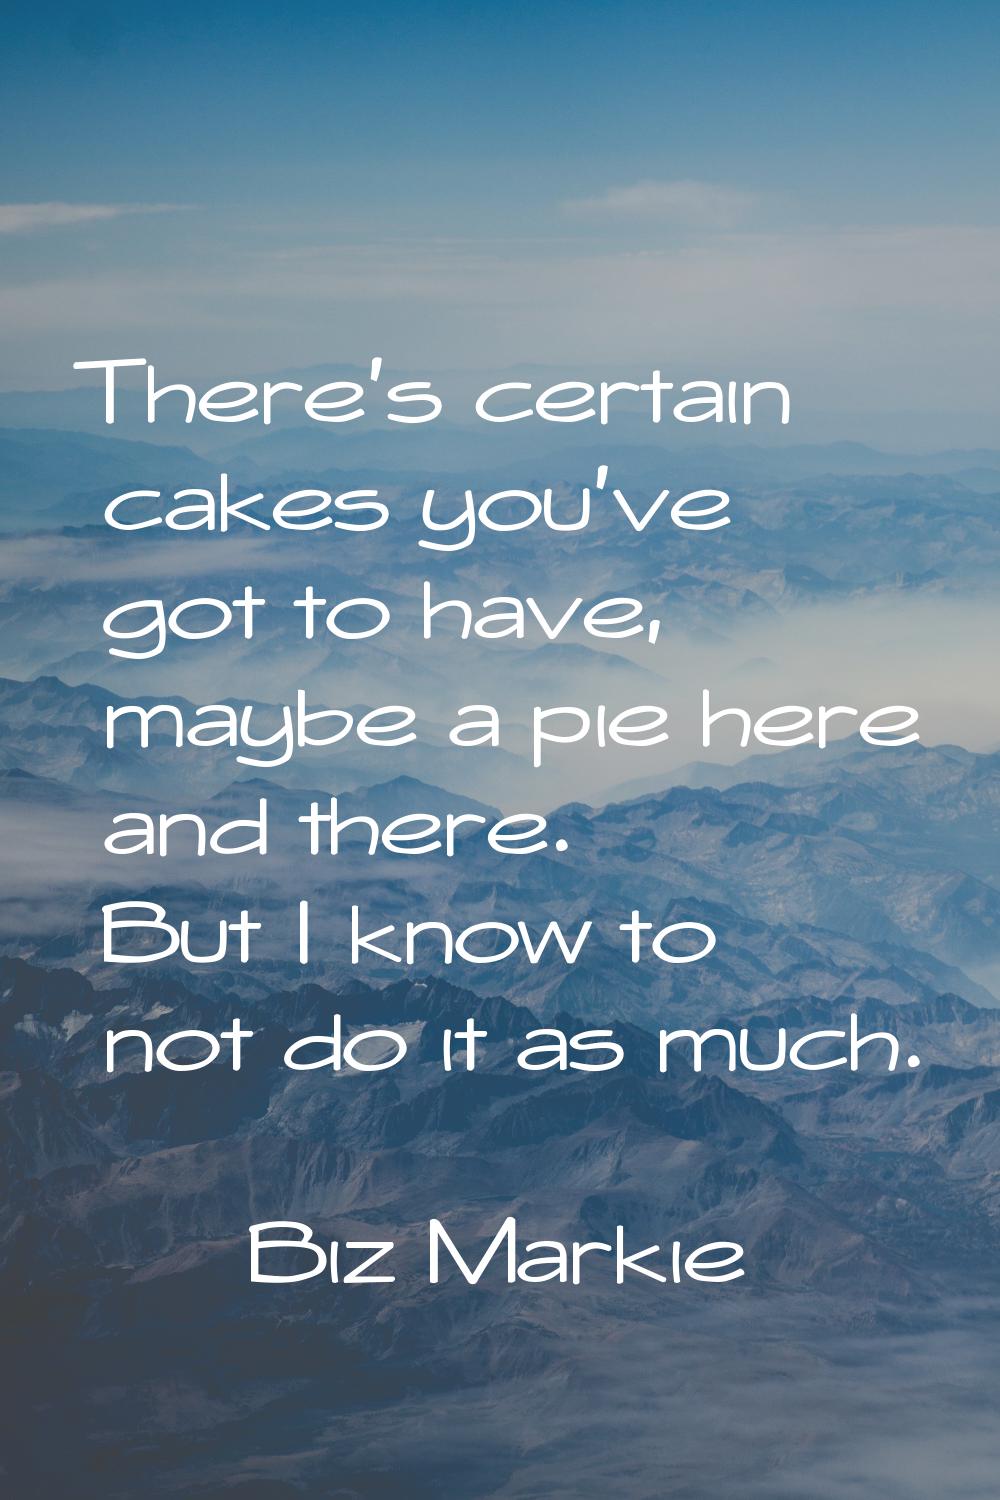 There's certain cakes you've got to have, maybe a pie here and there. But I know to not do it as mu